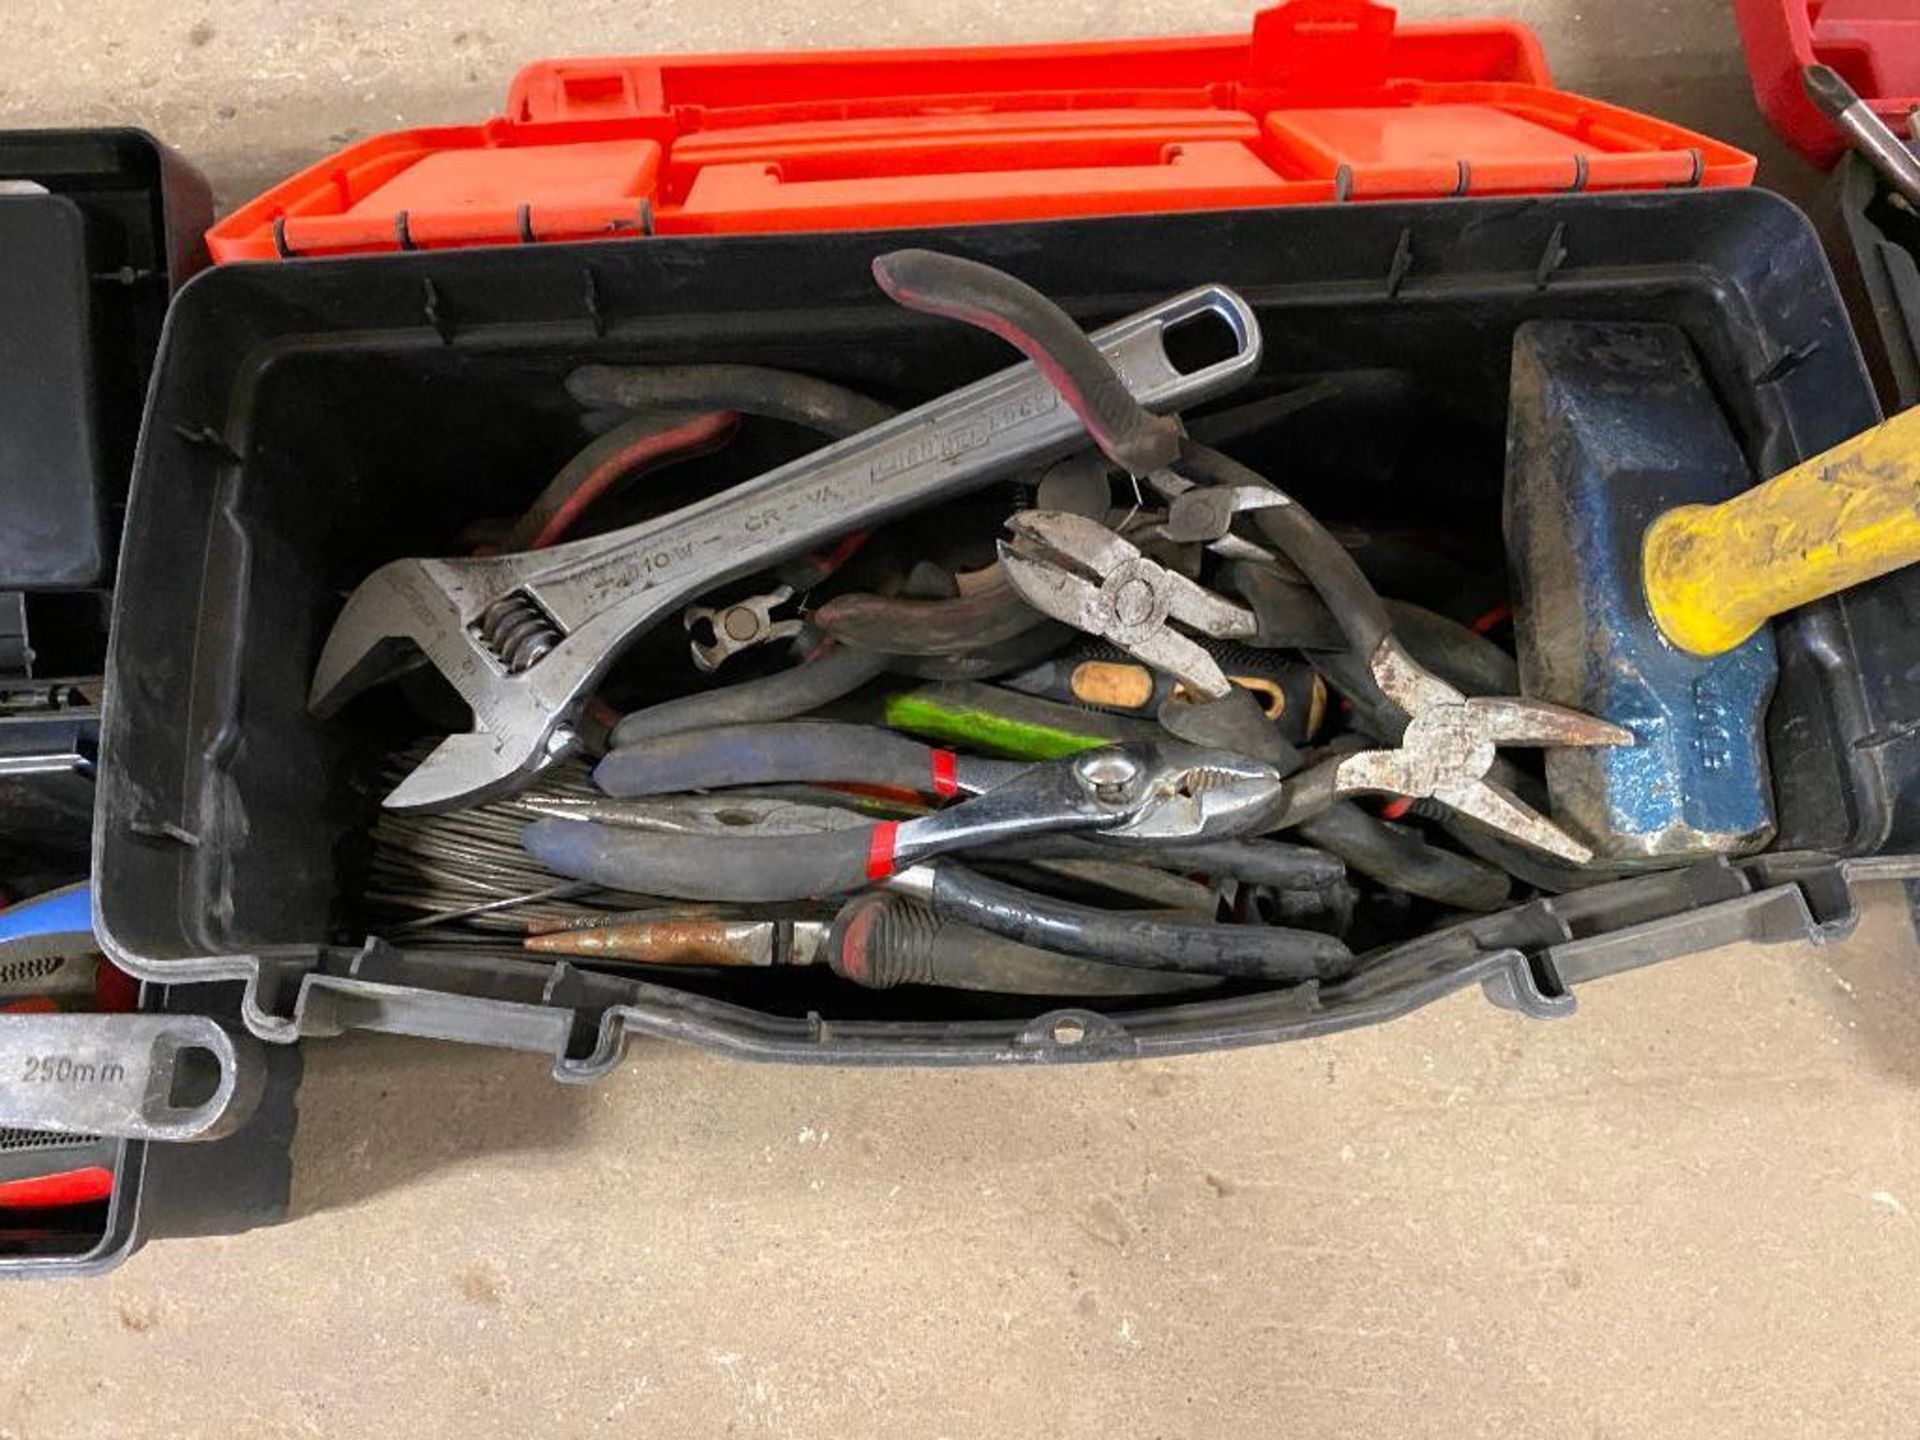 Tool Box w/ Asst. Tools including Pliers, Hammer, Tie Wire, Crescent Wrench, Cutters, etc. - Image 2 of 3